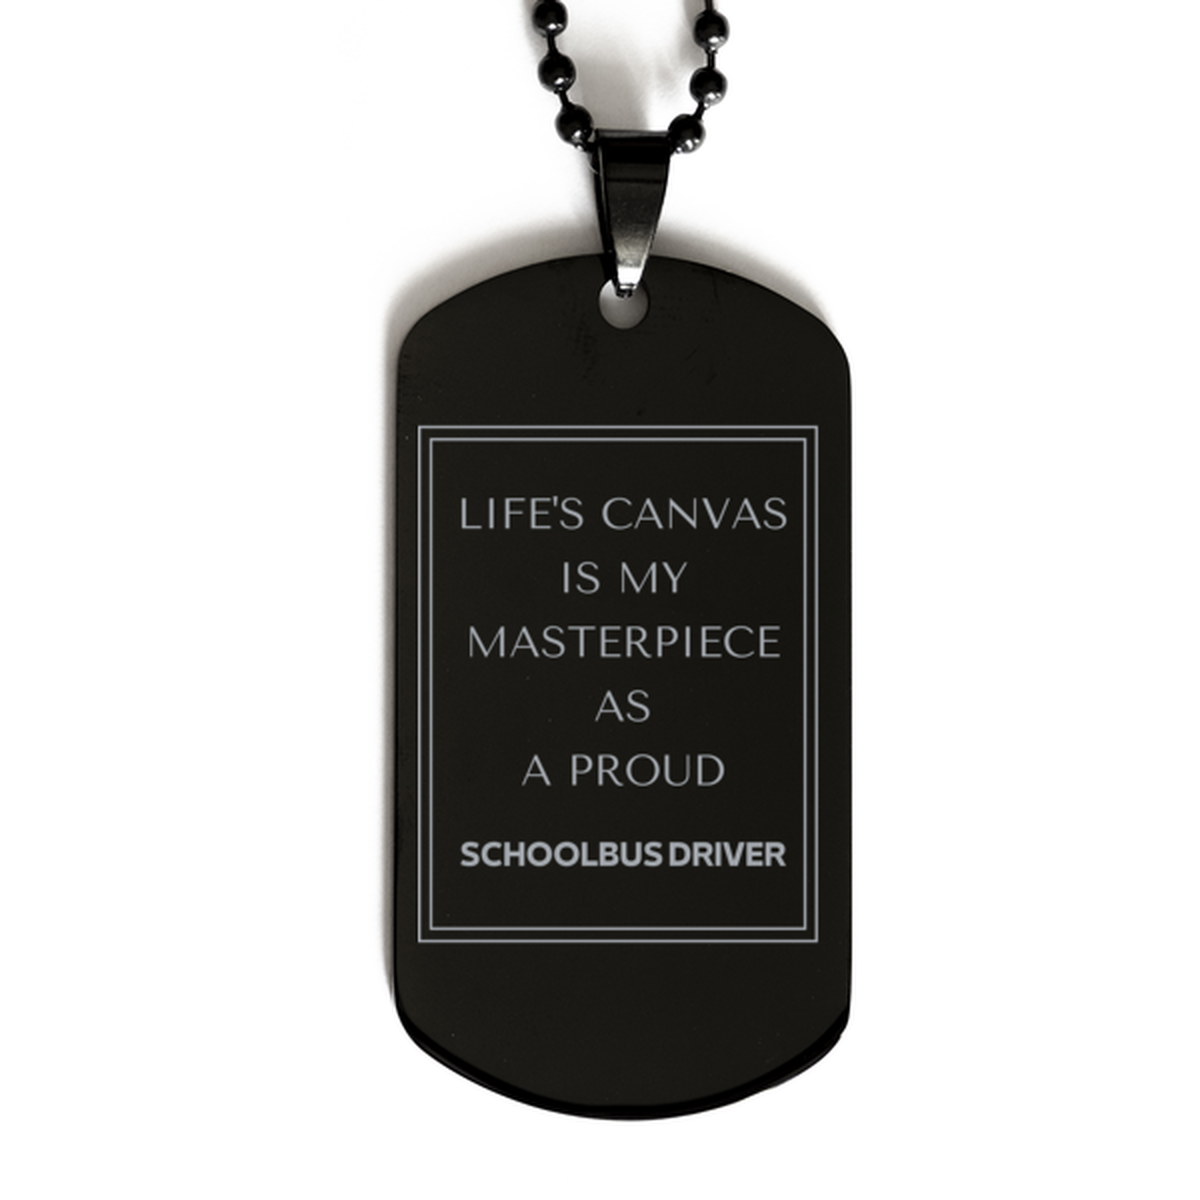 Proud Schoolbus Driver Gifts, Life's canvas is my masterpiece, Epic Birthday Christmas Unique Black Dog Tag For Schoolbus Driver, Coworkers, Men, Women, Friends